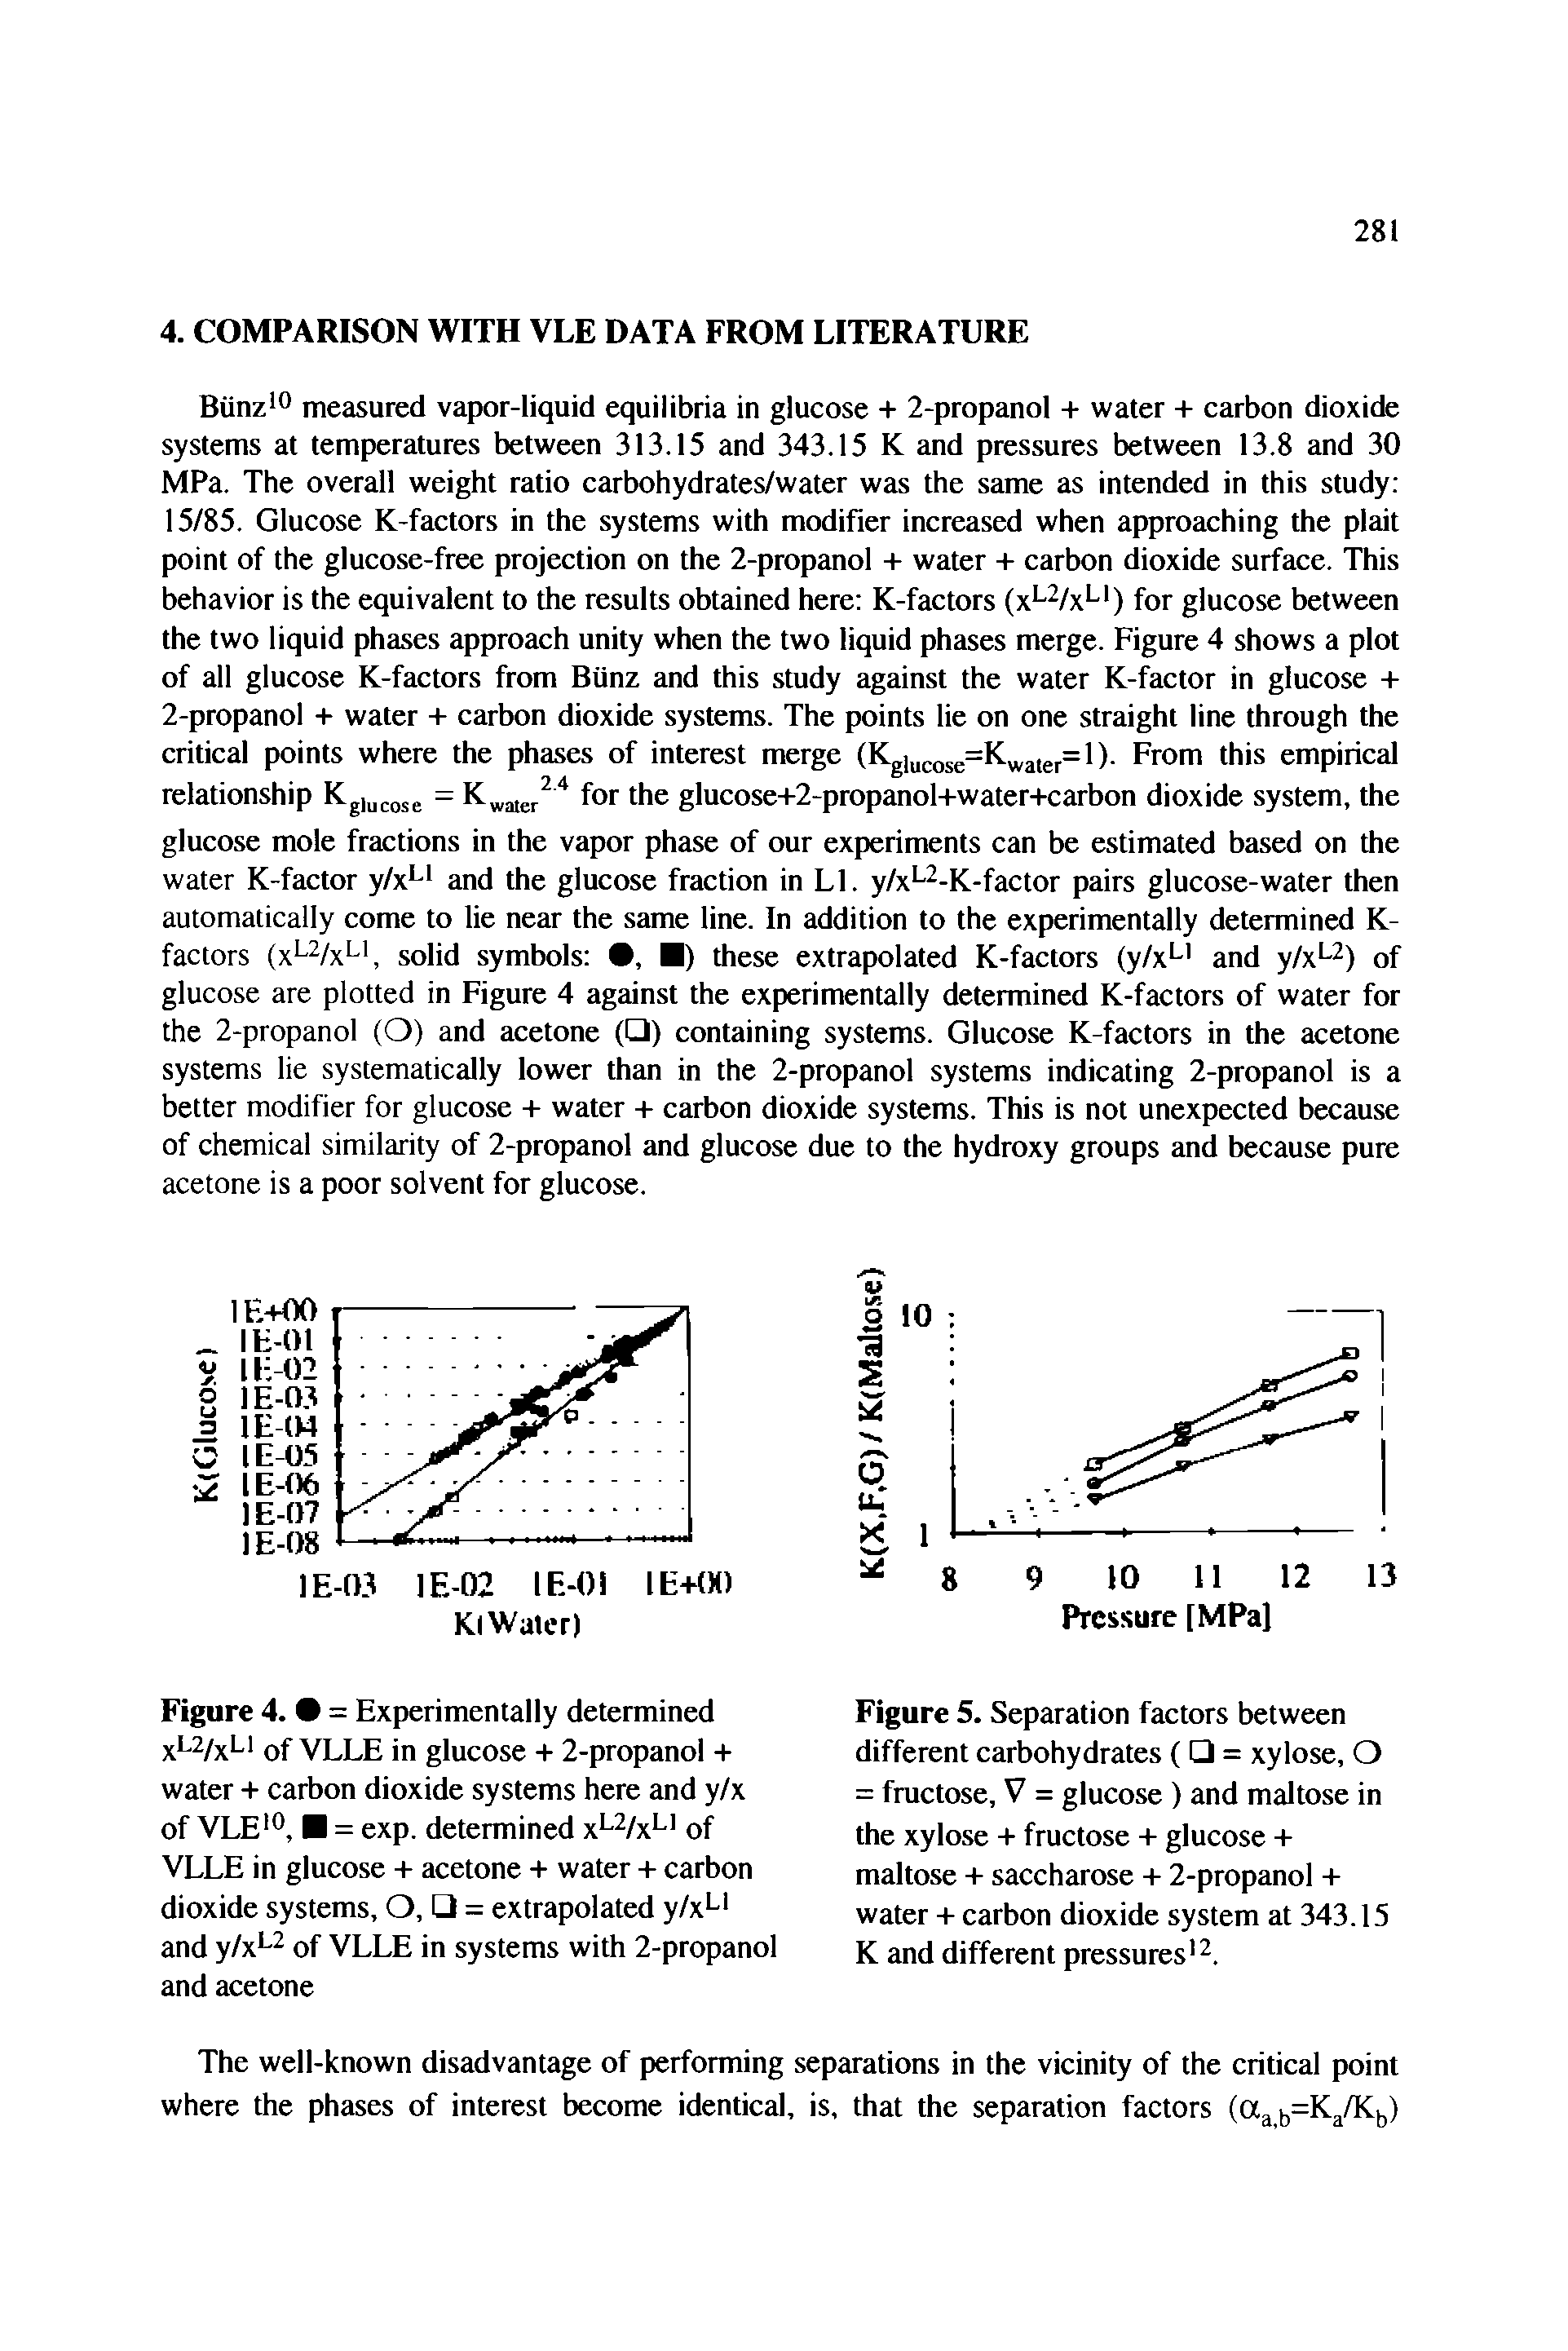 Figure 5. Separation factors between different carbohydrates ( = xylose, O = fructose, V = glucose) and maltose in the xylose + fructose + glucose + maltose + saccharose + 2-propanol + water + carbon dioxide system at 343.15 K and different pressures12.